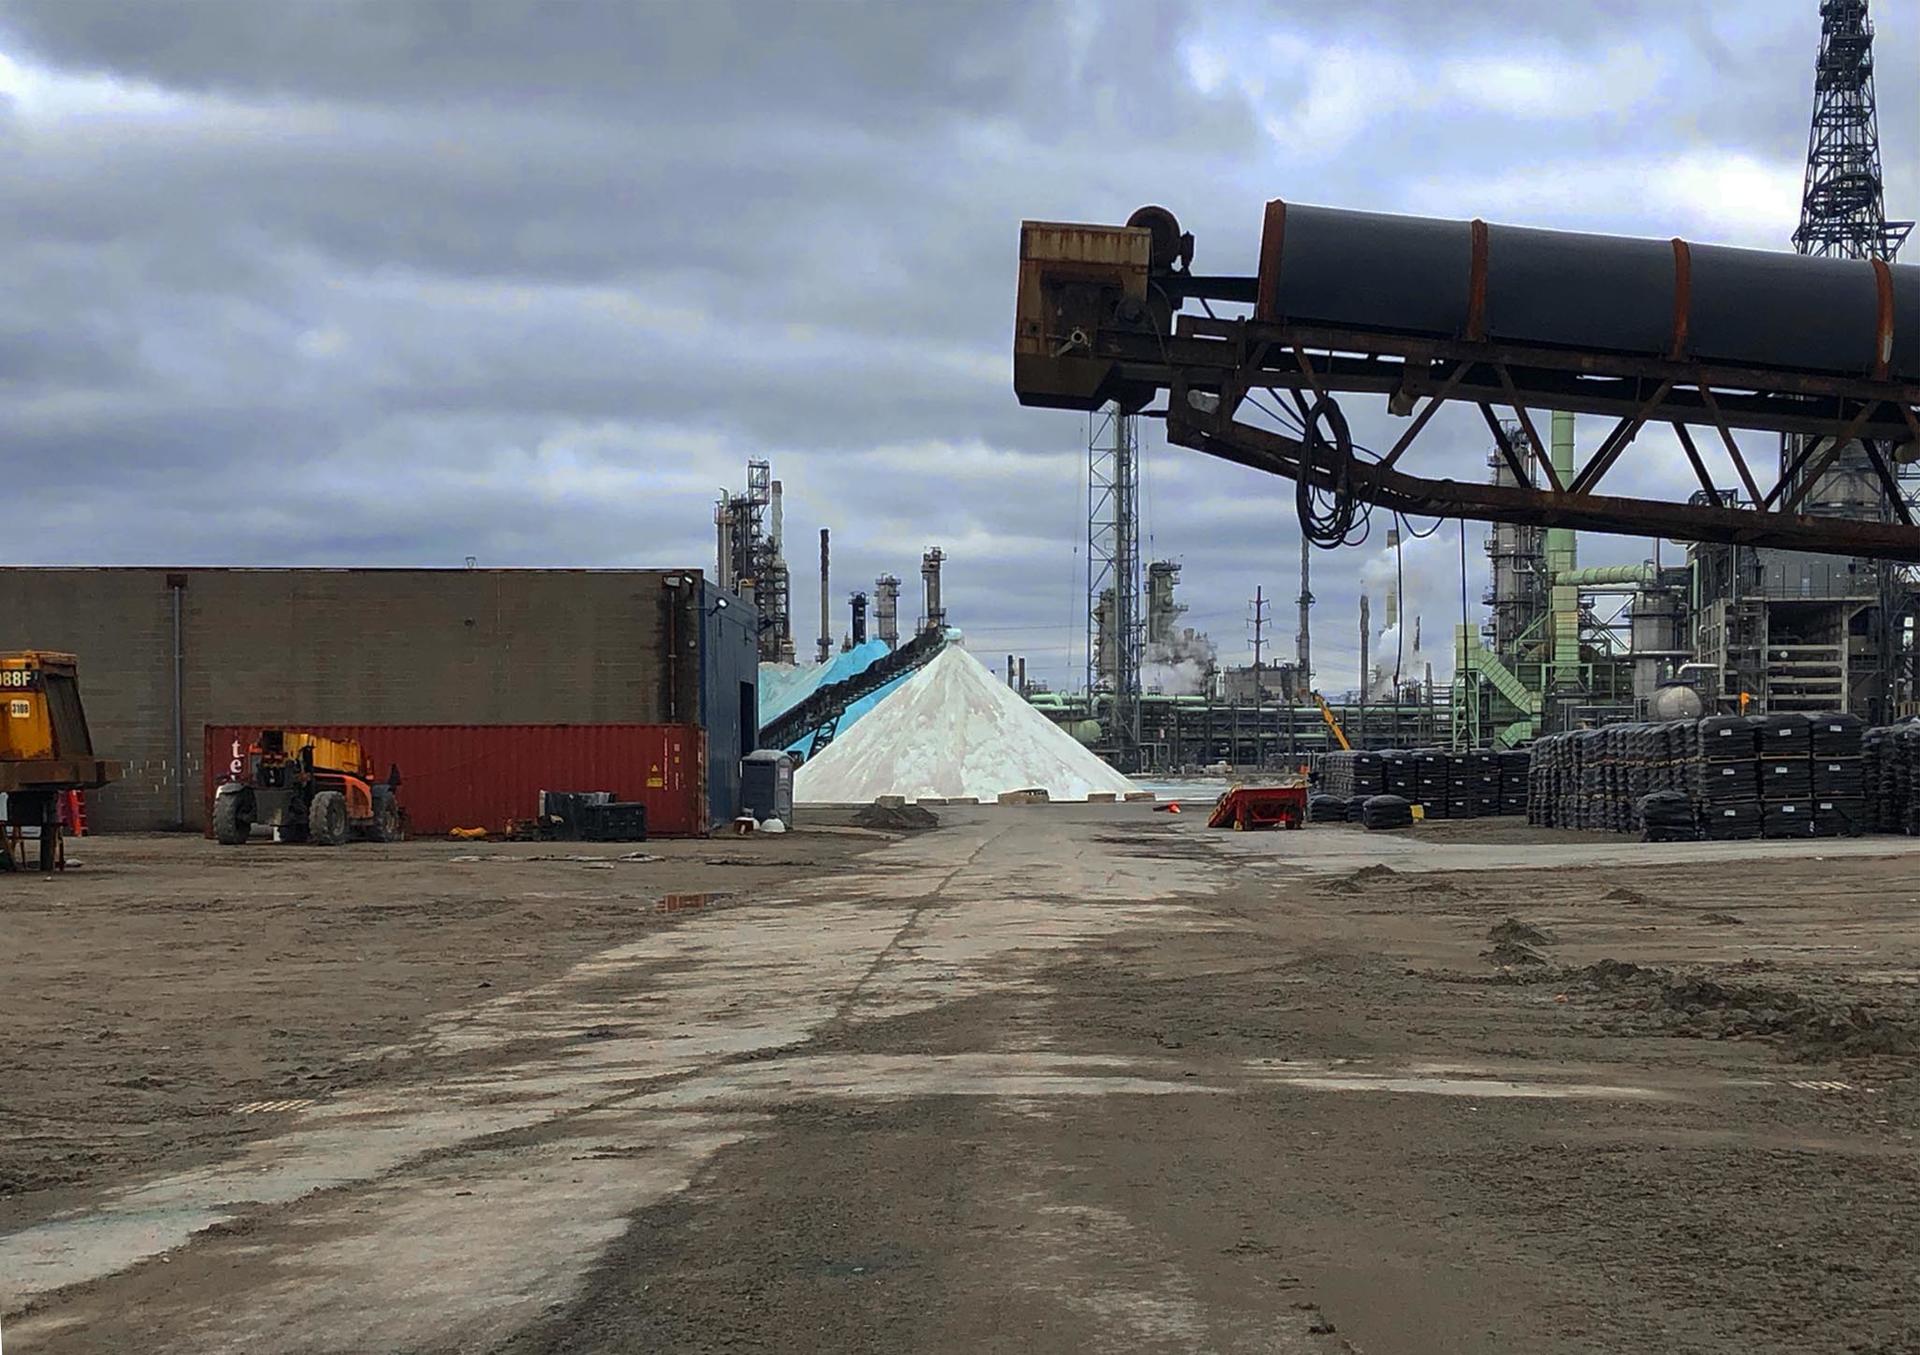 A photograph of some of the facilities of the Detroit Salt Co.  including mining equipment, heavy machinery, and stockpiles of road salt.